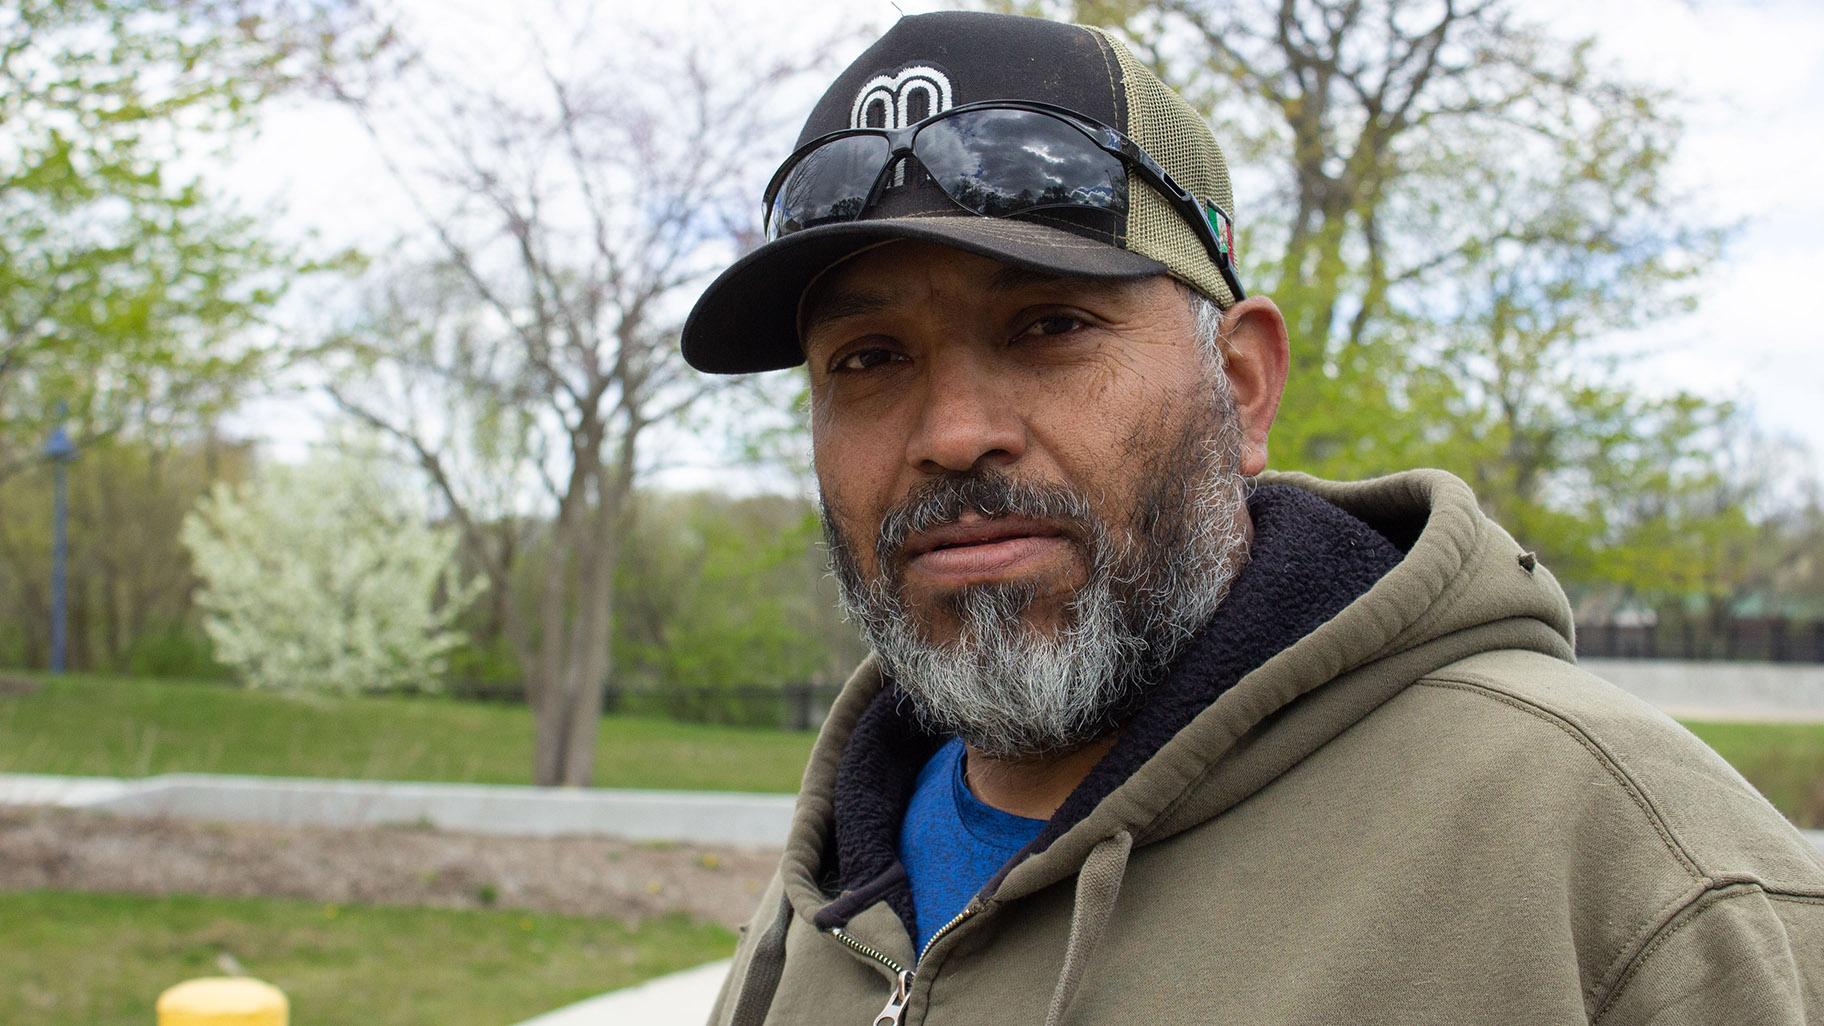 Landscaper Juan Mora says Evanston’s gas-powered leaf blower ban has made it a financial hardship to continue doing business in the suburb. (Blair Paddock / WTTW News)